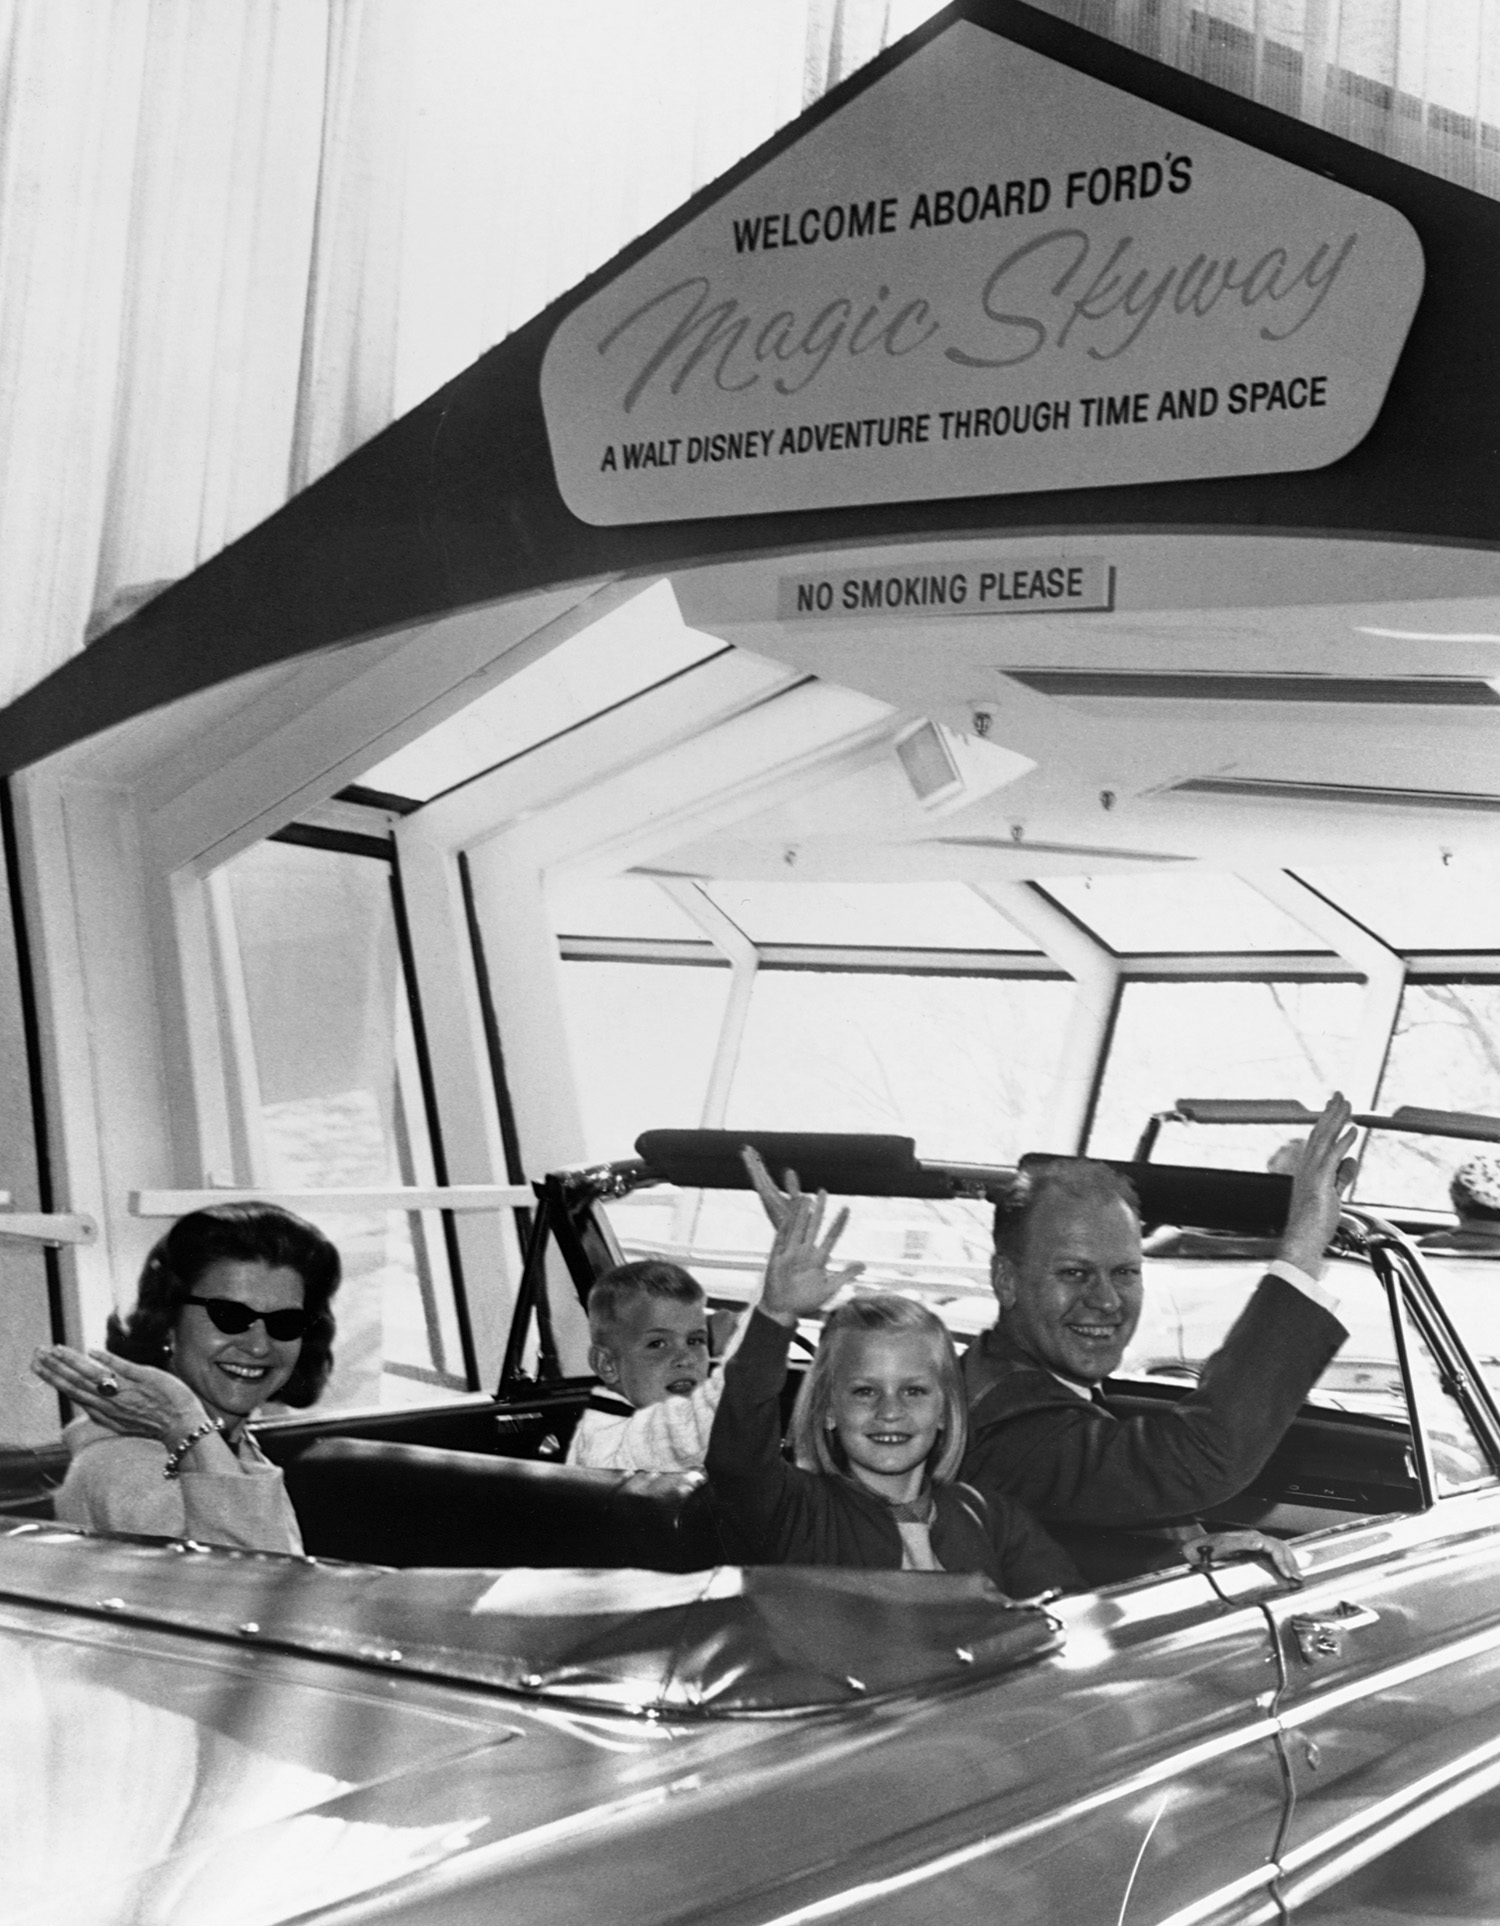 exhibitors riding the Ford and Walt Disney Magic Skyway in a Mustang at the 1964 World's Fair in New York City